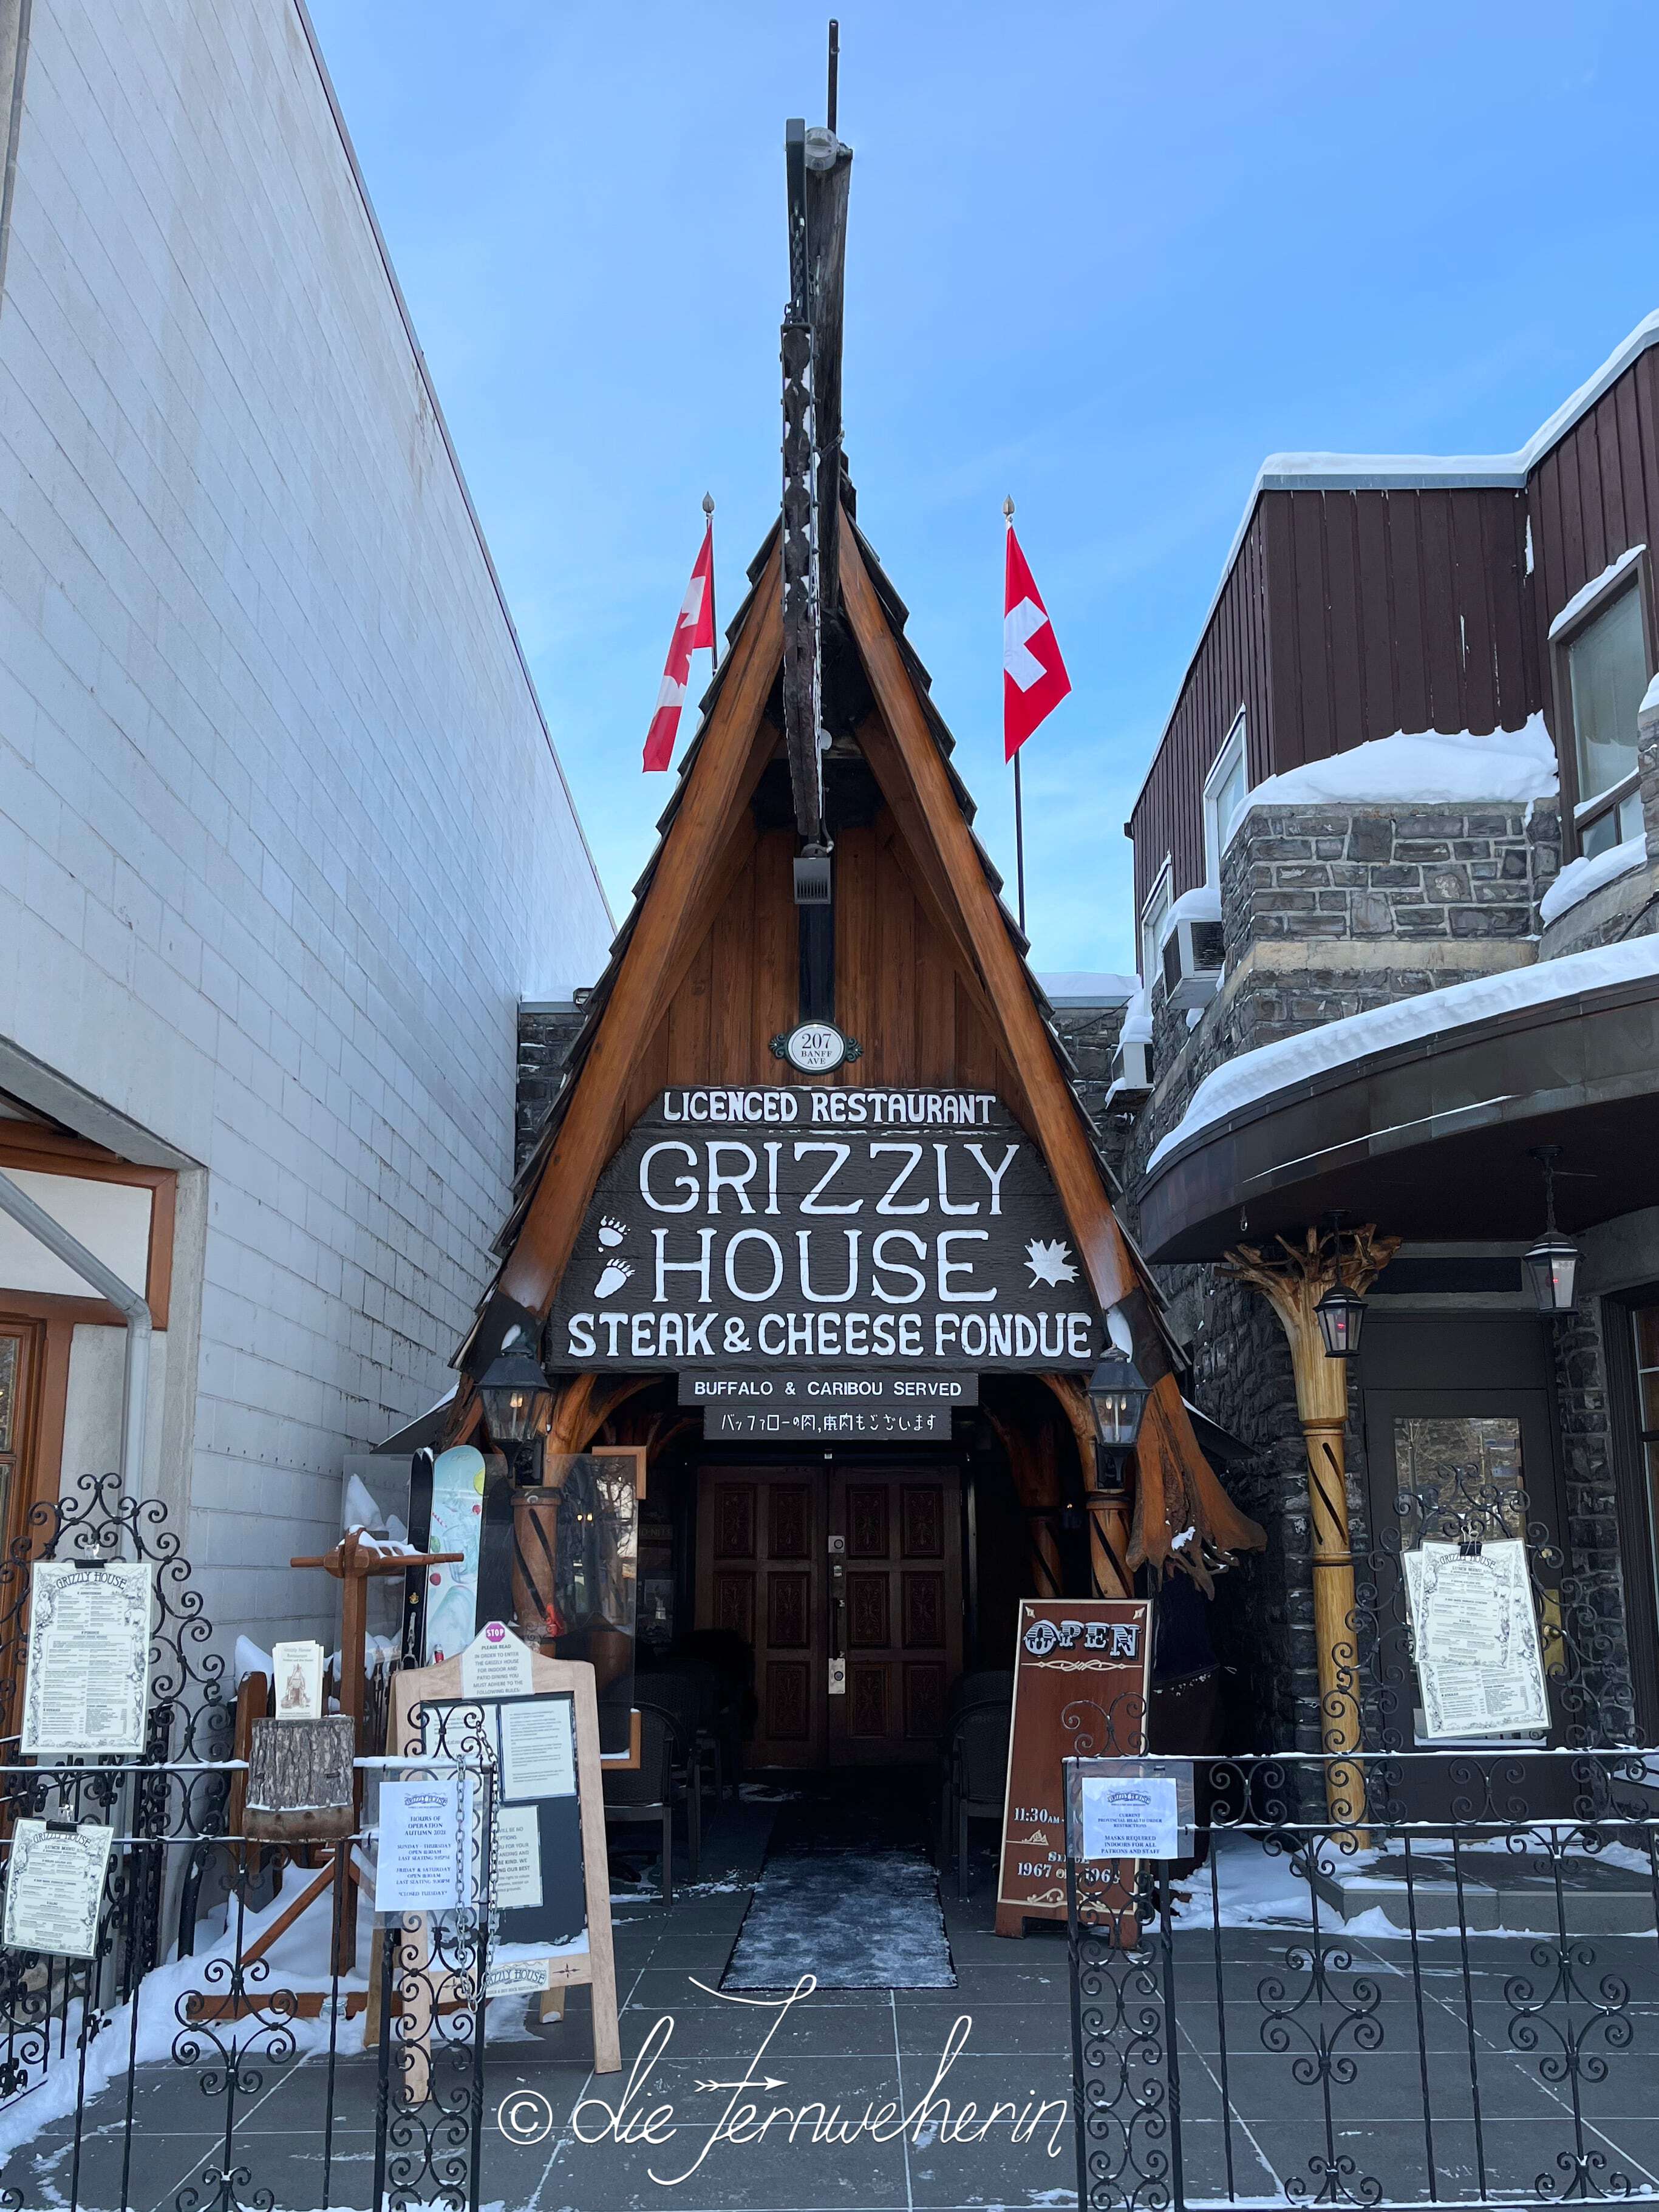 Exterior view of Grizzly House, a restaurant in the town of Banff.